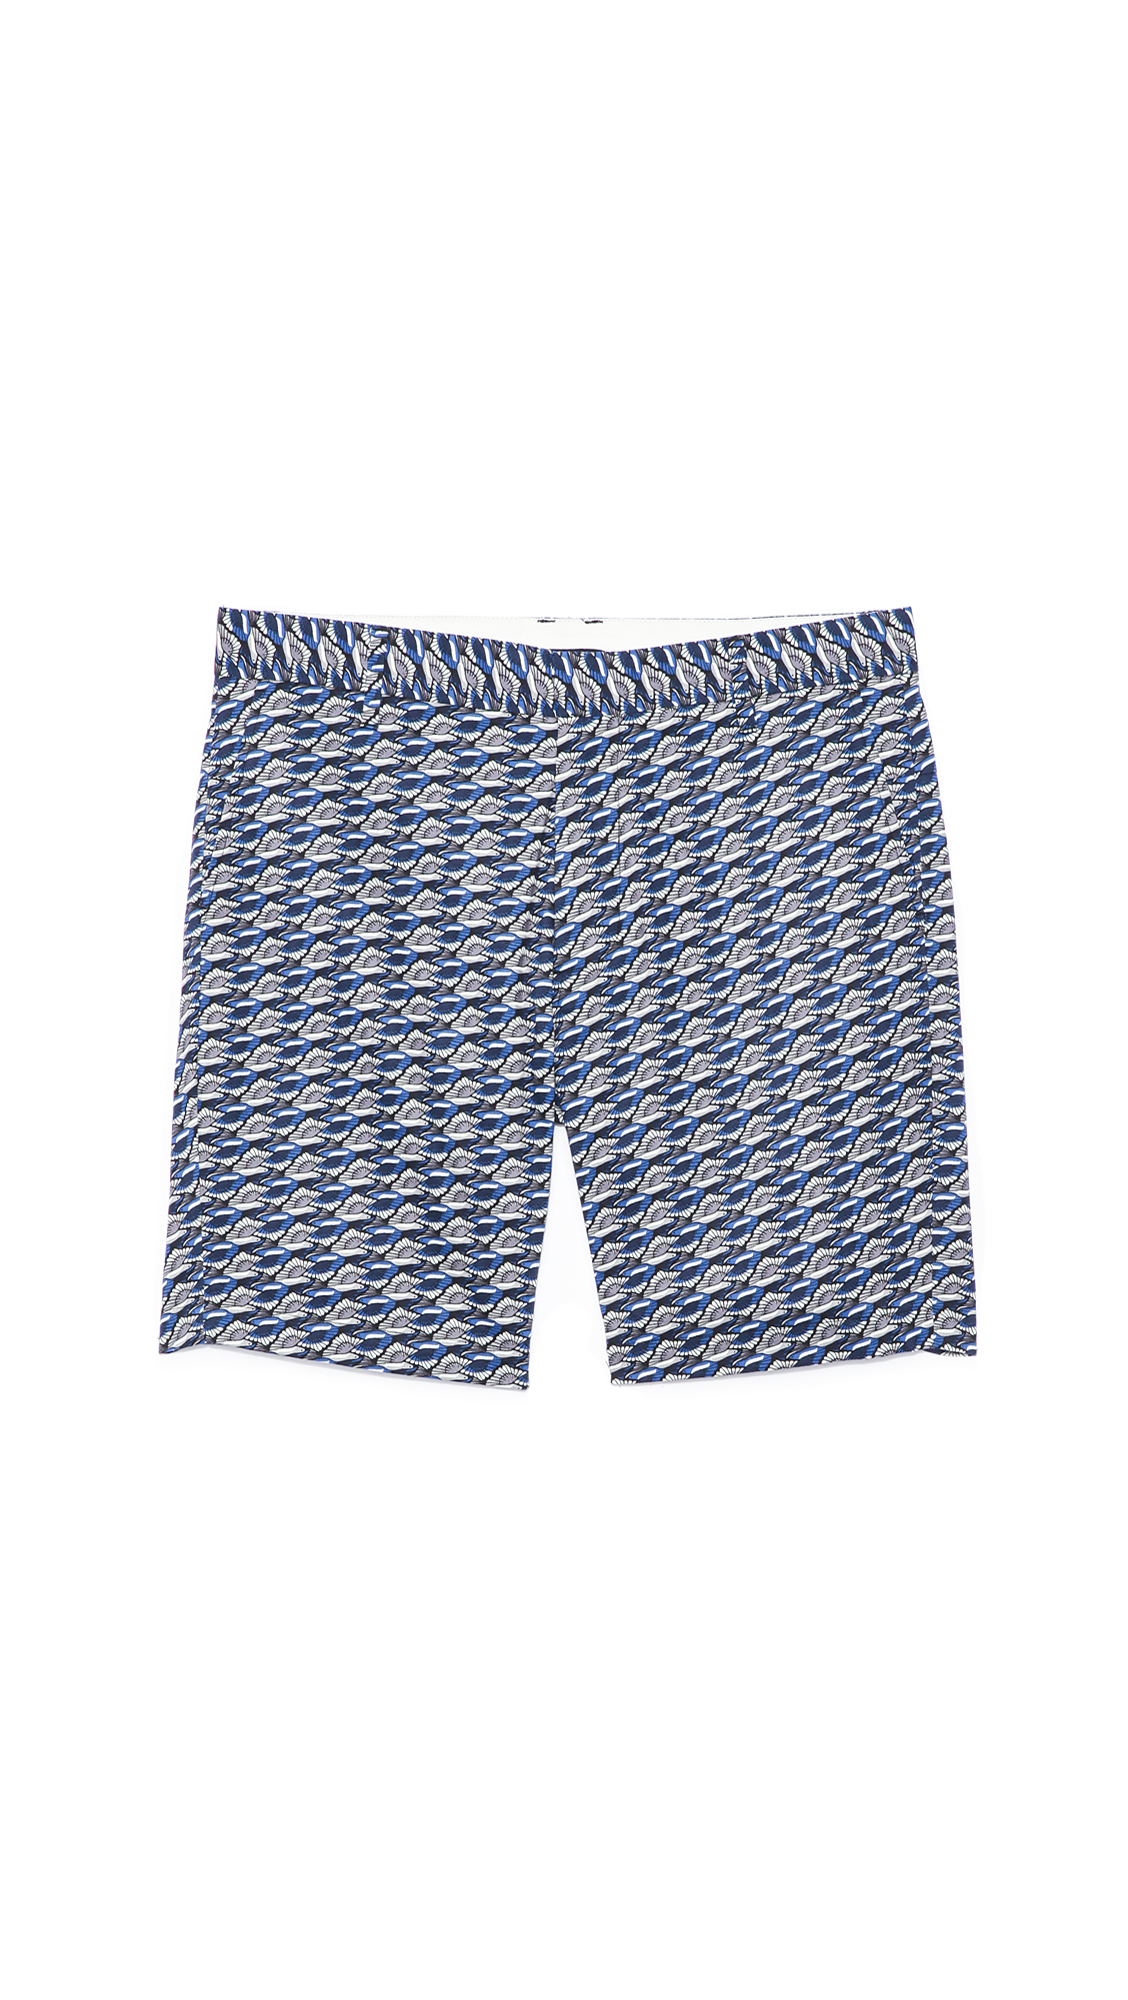 Lyst - Opening ceremony Pie Shorts in Blue for Men